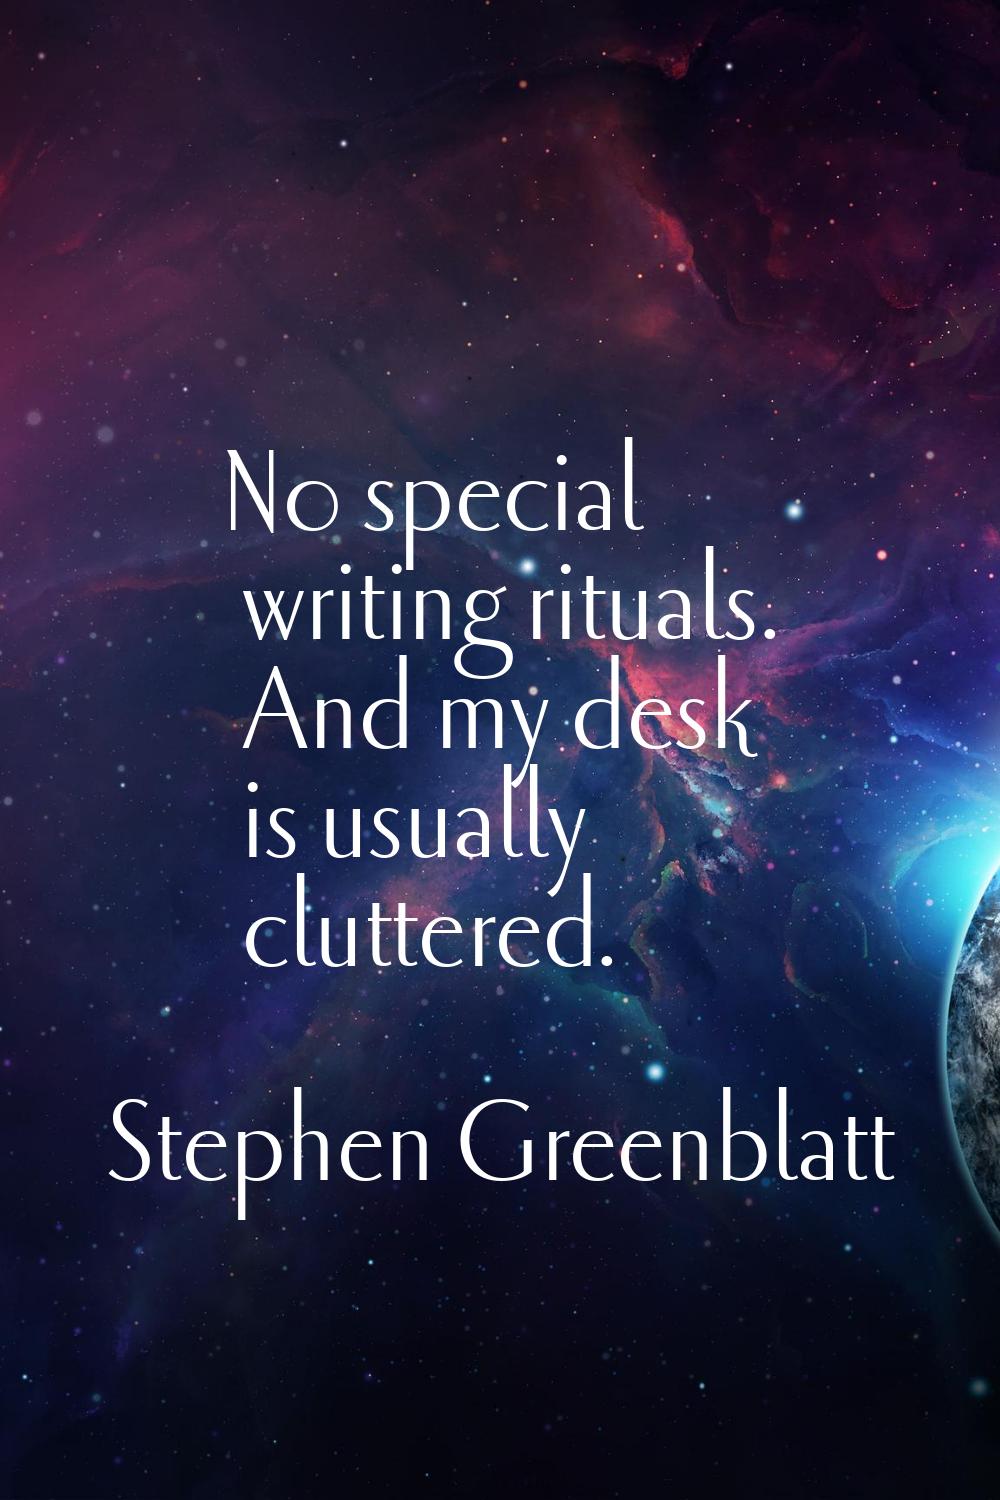 No special writing rituals. And my desk is usually cluttered.